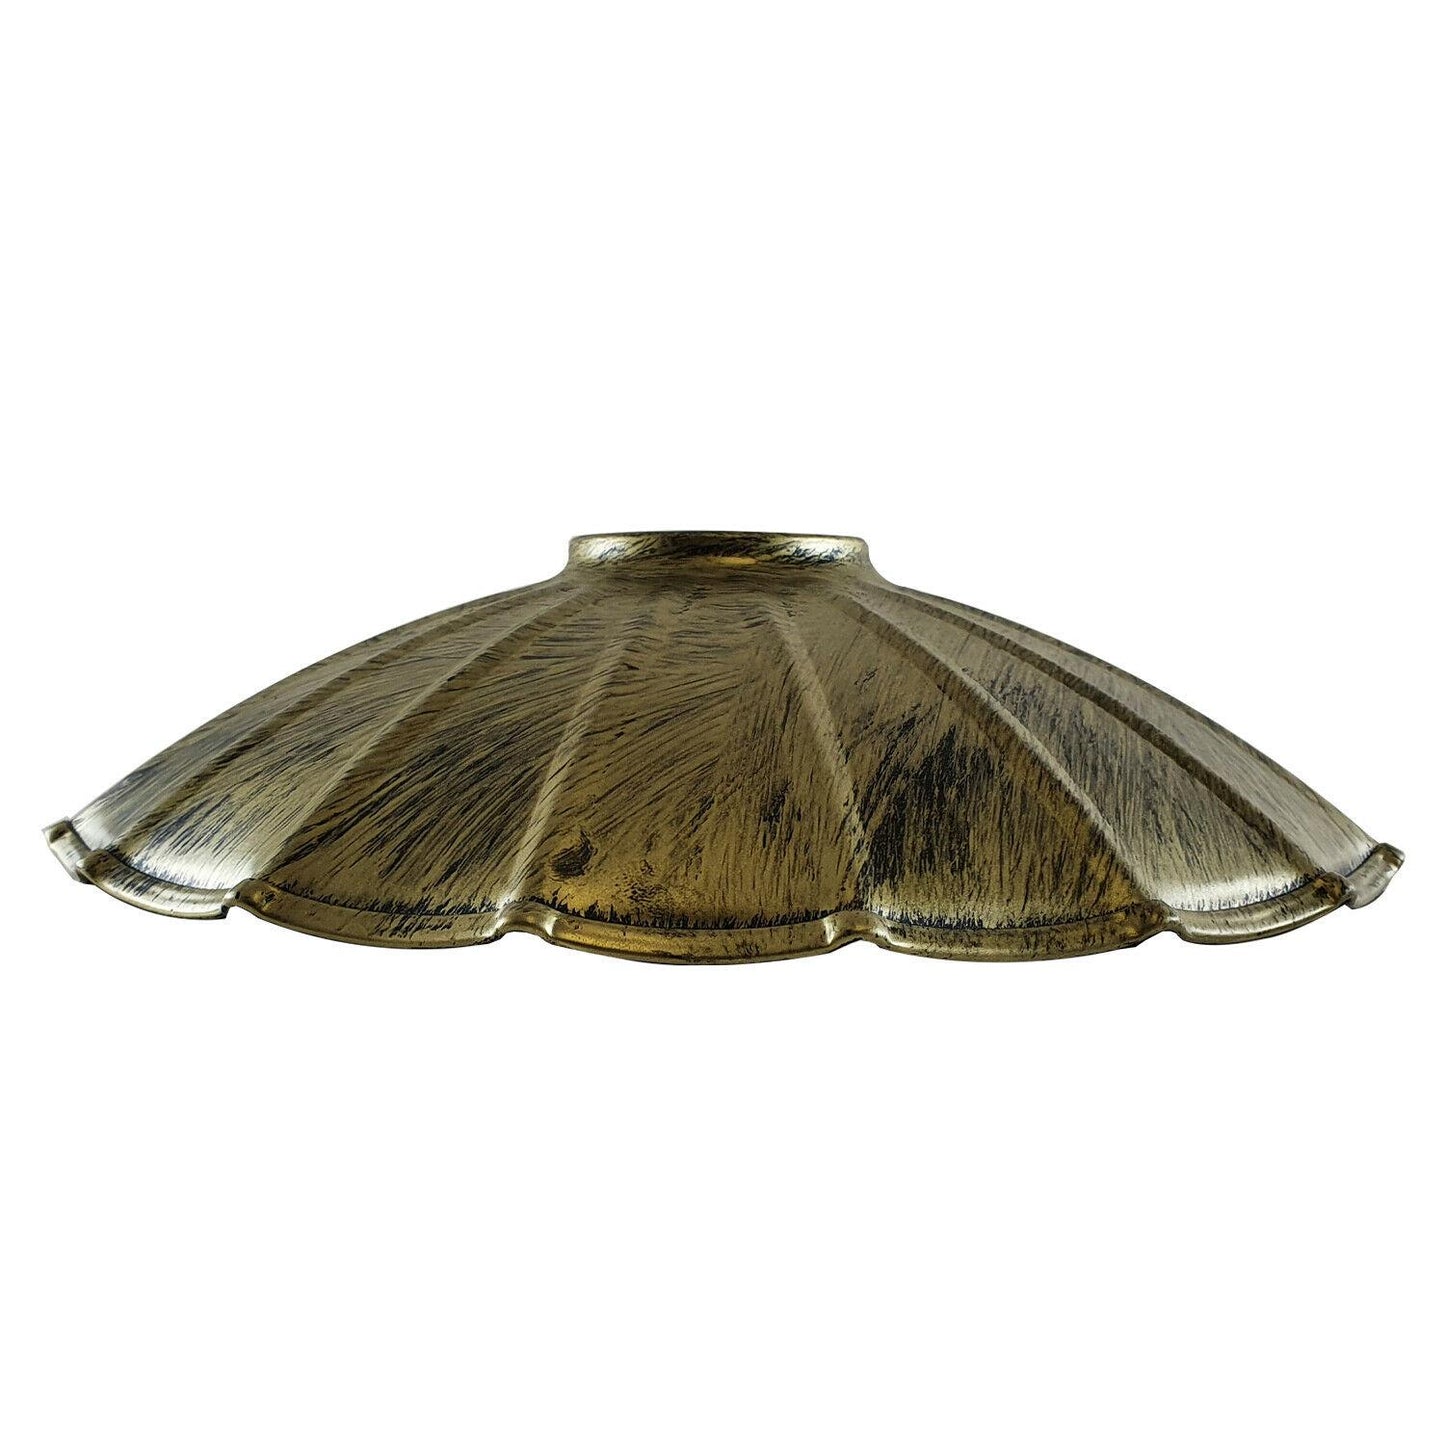 Brushed Color Vintage Industrial Ceiling Pendant Light Umbrella Shade Rustic Lampshade Easy Fit Wavy Shade UK